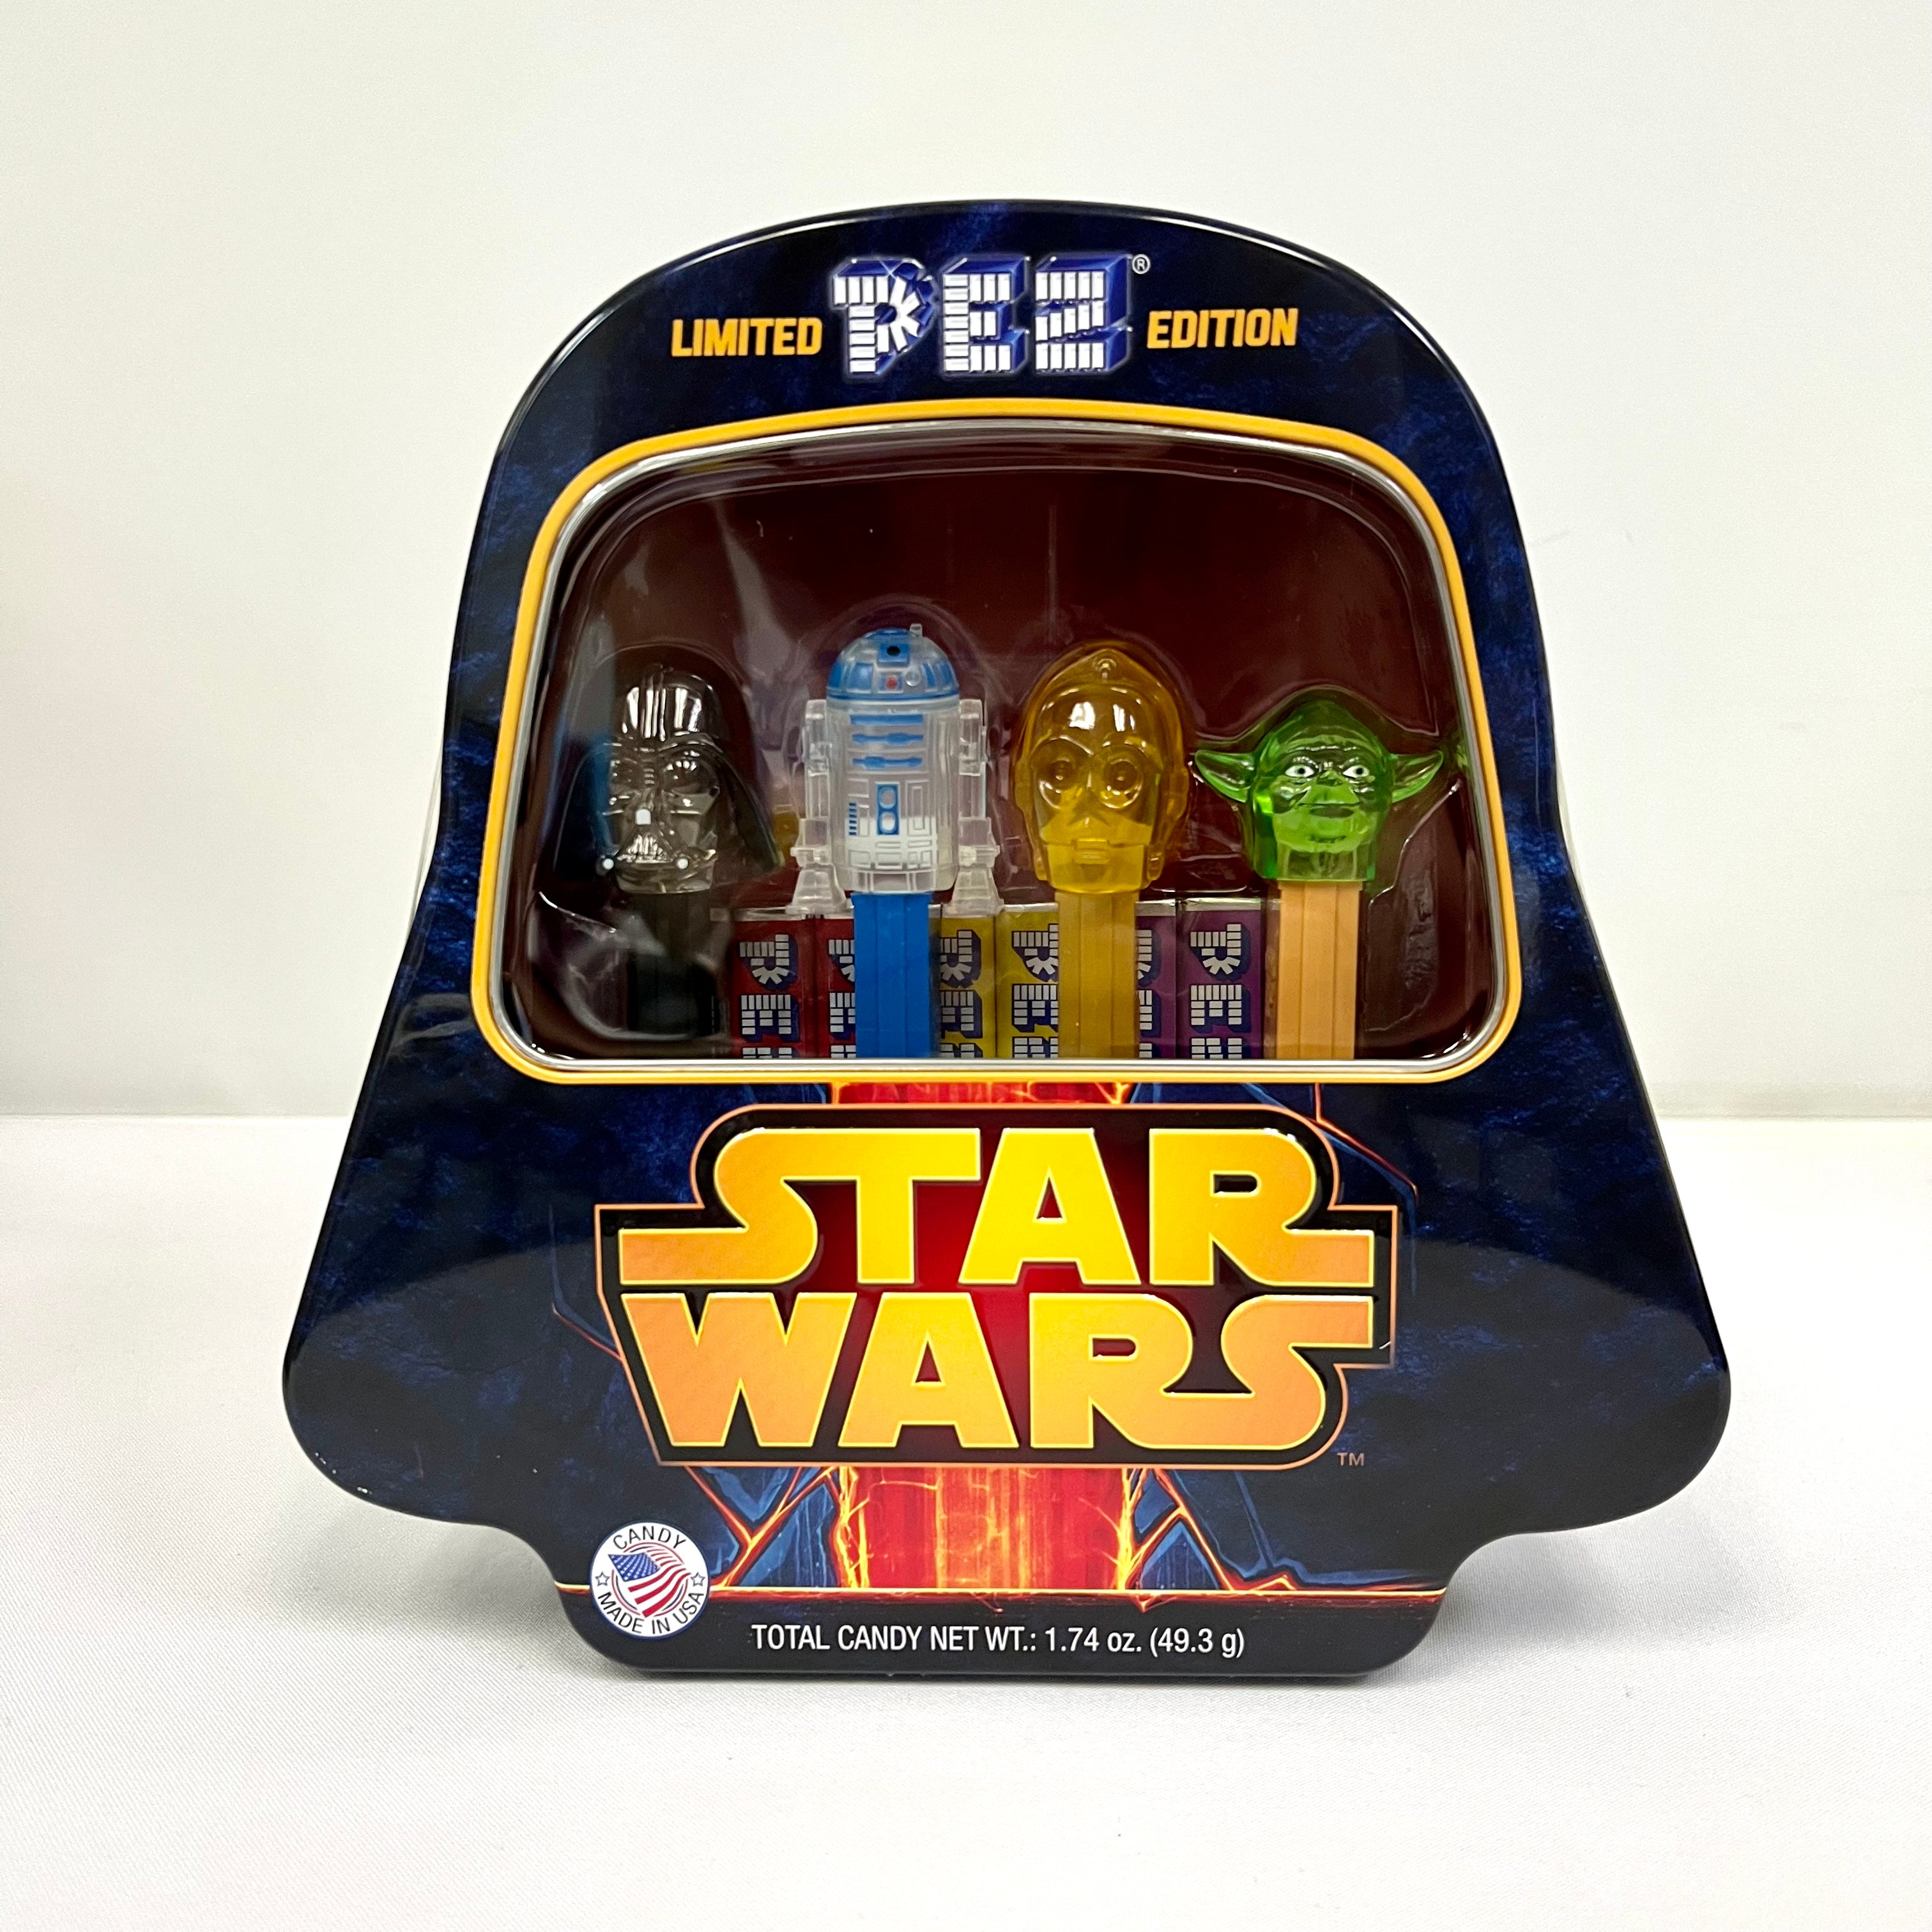 Star Wars Limited Edition PEZ Candy Dispenser Millennium Falcon Collector Series